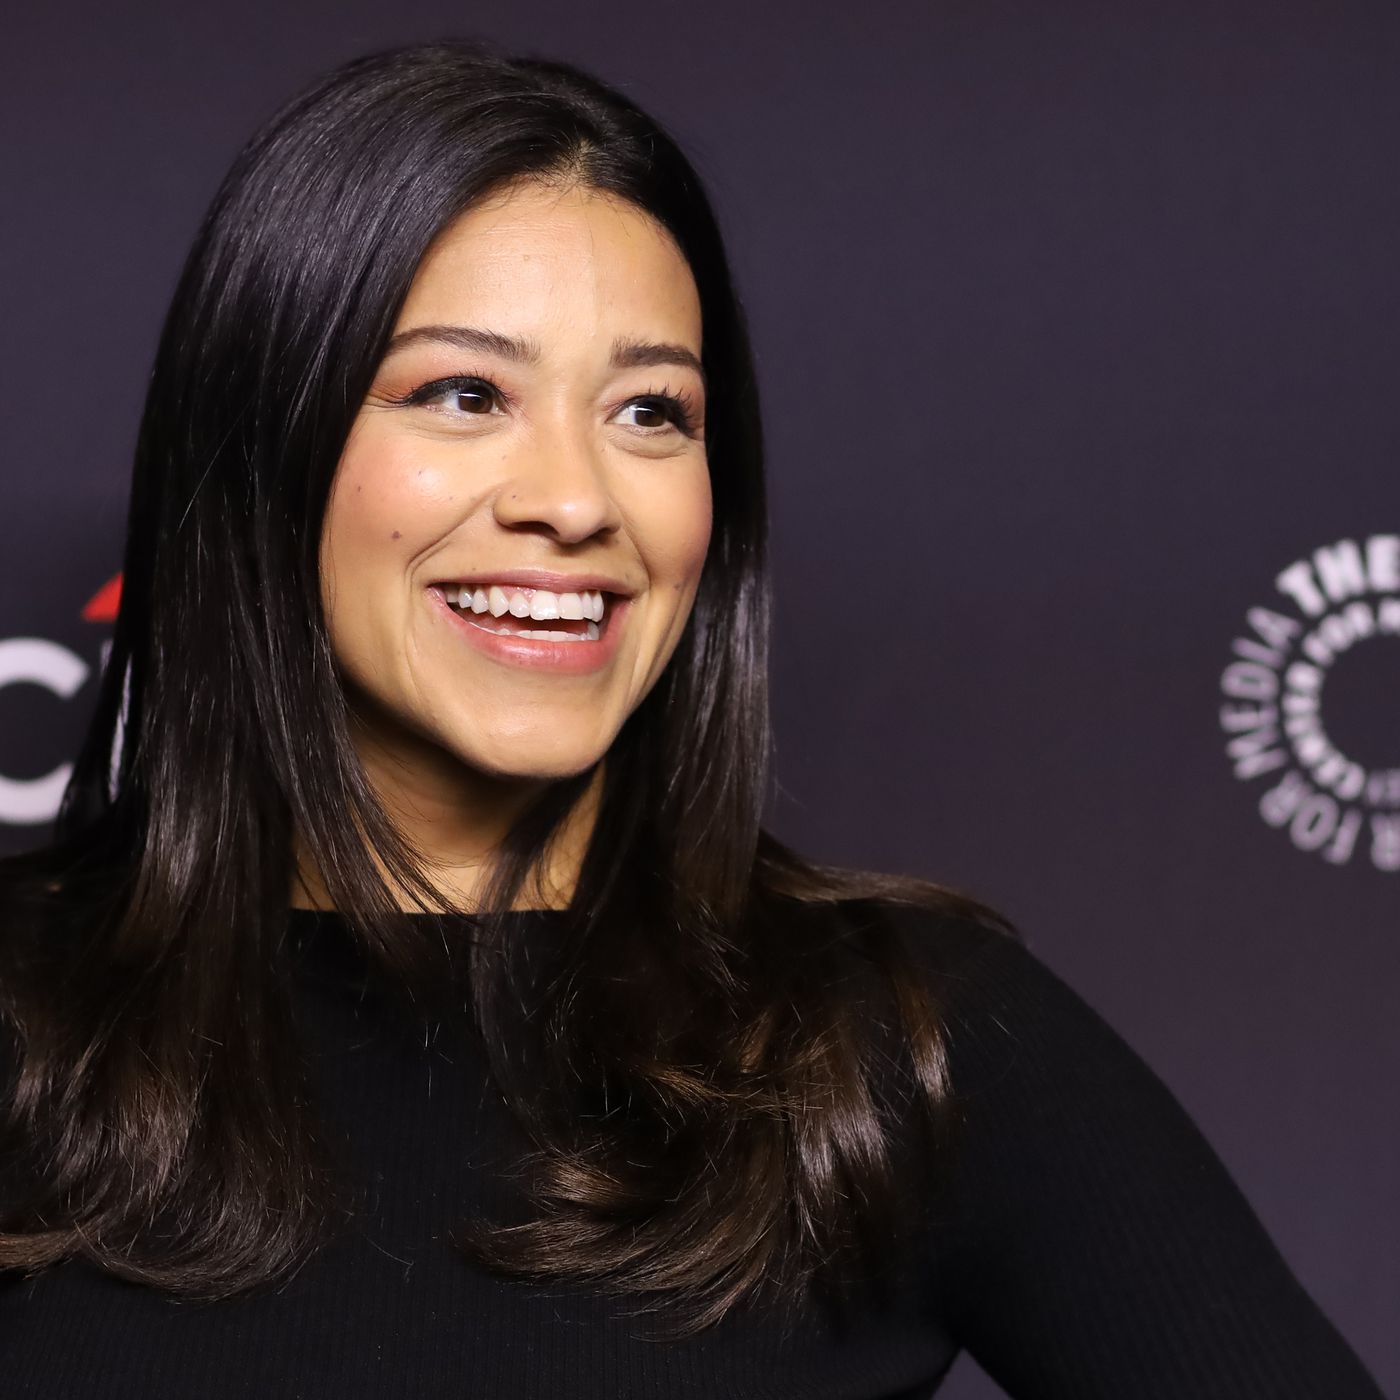 30 Interesting Things Most People Don’t Know About Gina Rodriguez